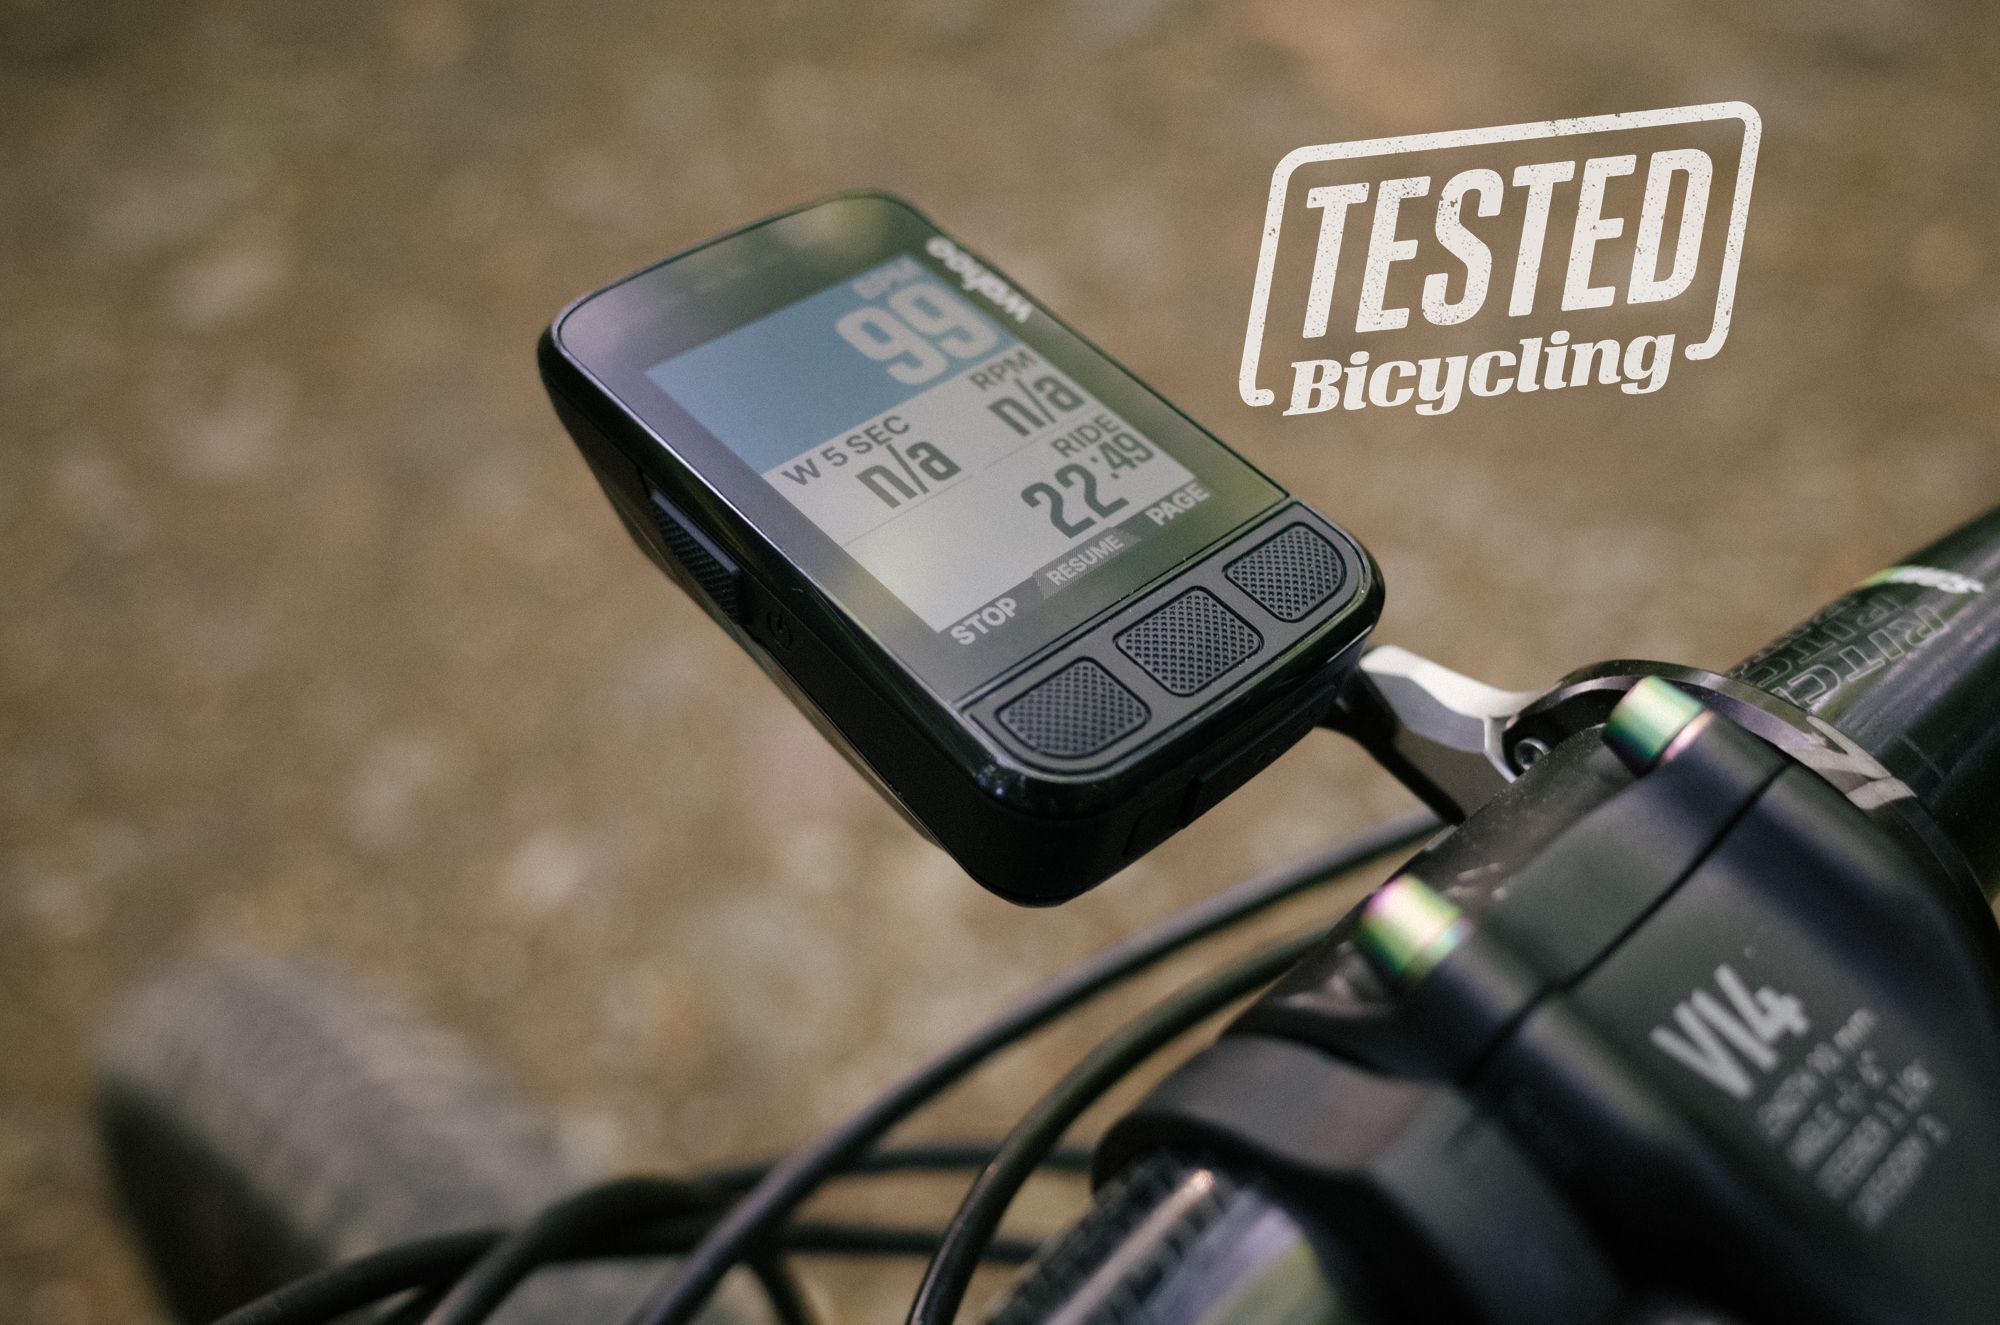 Druif sigaret Kruiden New Wahoo Elemnt Bolt Review | Best GPS Cycling Computers